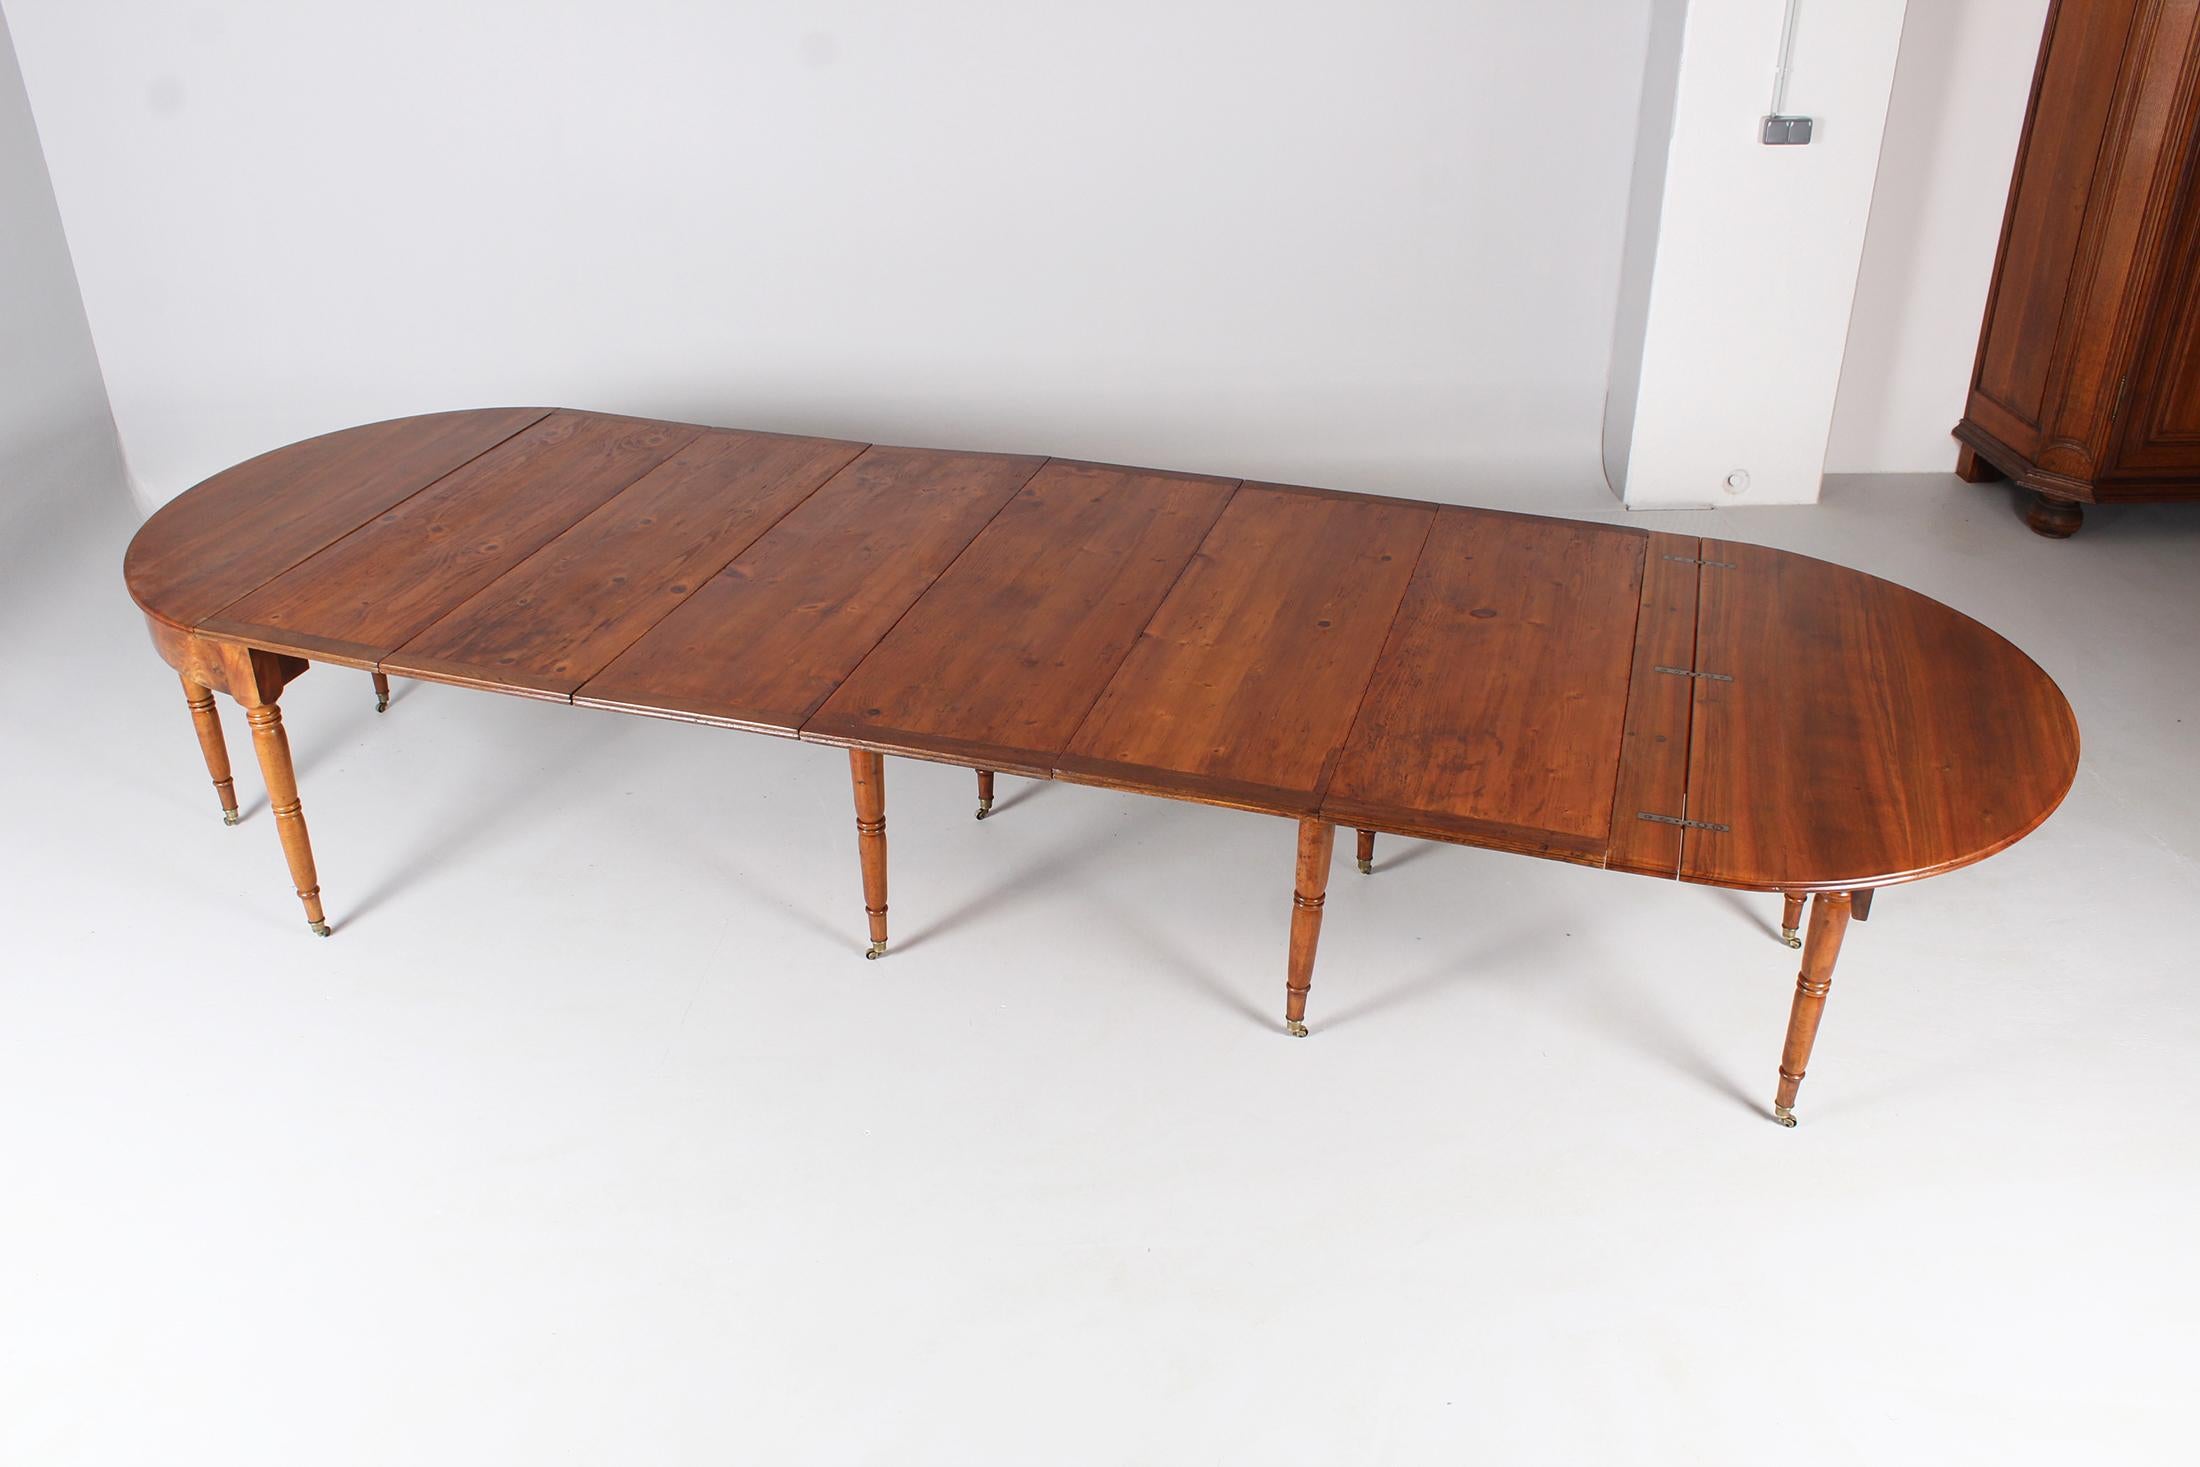 Large 19th Century Dining Table, Walnut, 12-16 People 6